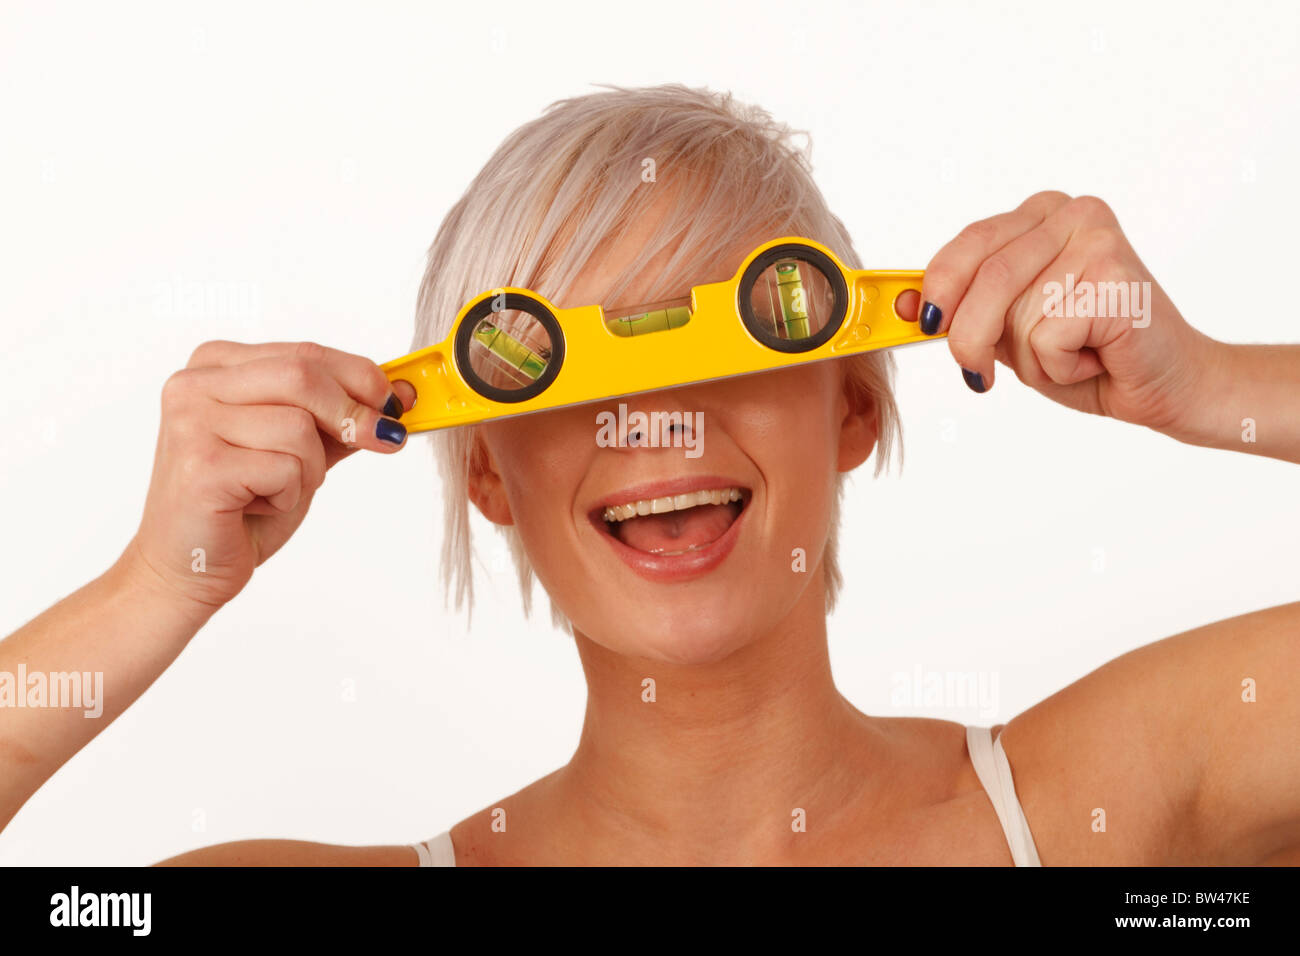 young woman holding a spirit level as part of an apprenticeship course  or training scheme Stock Photo